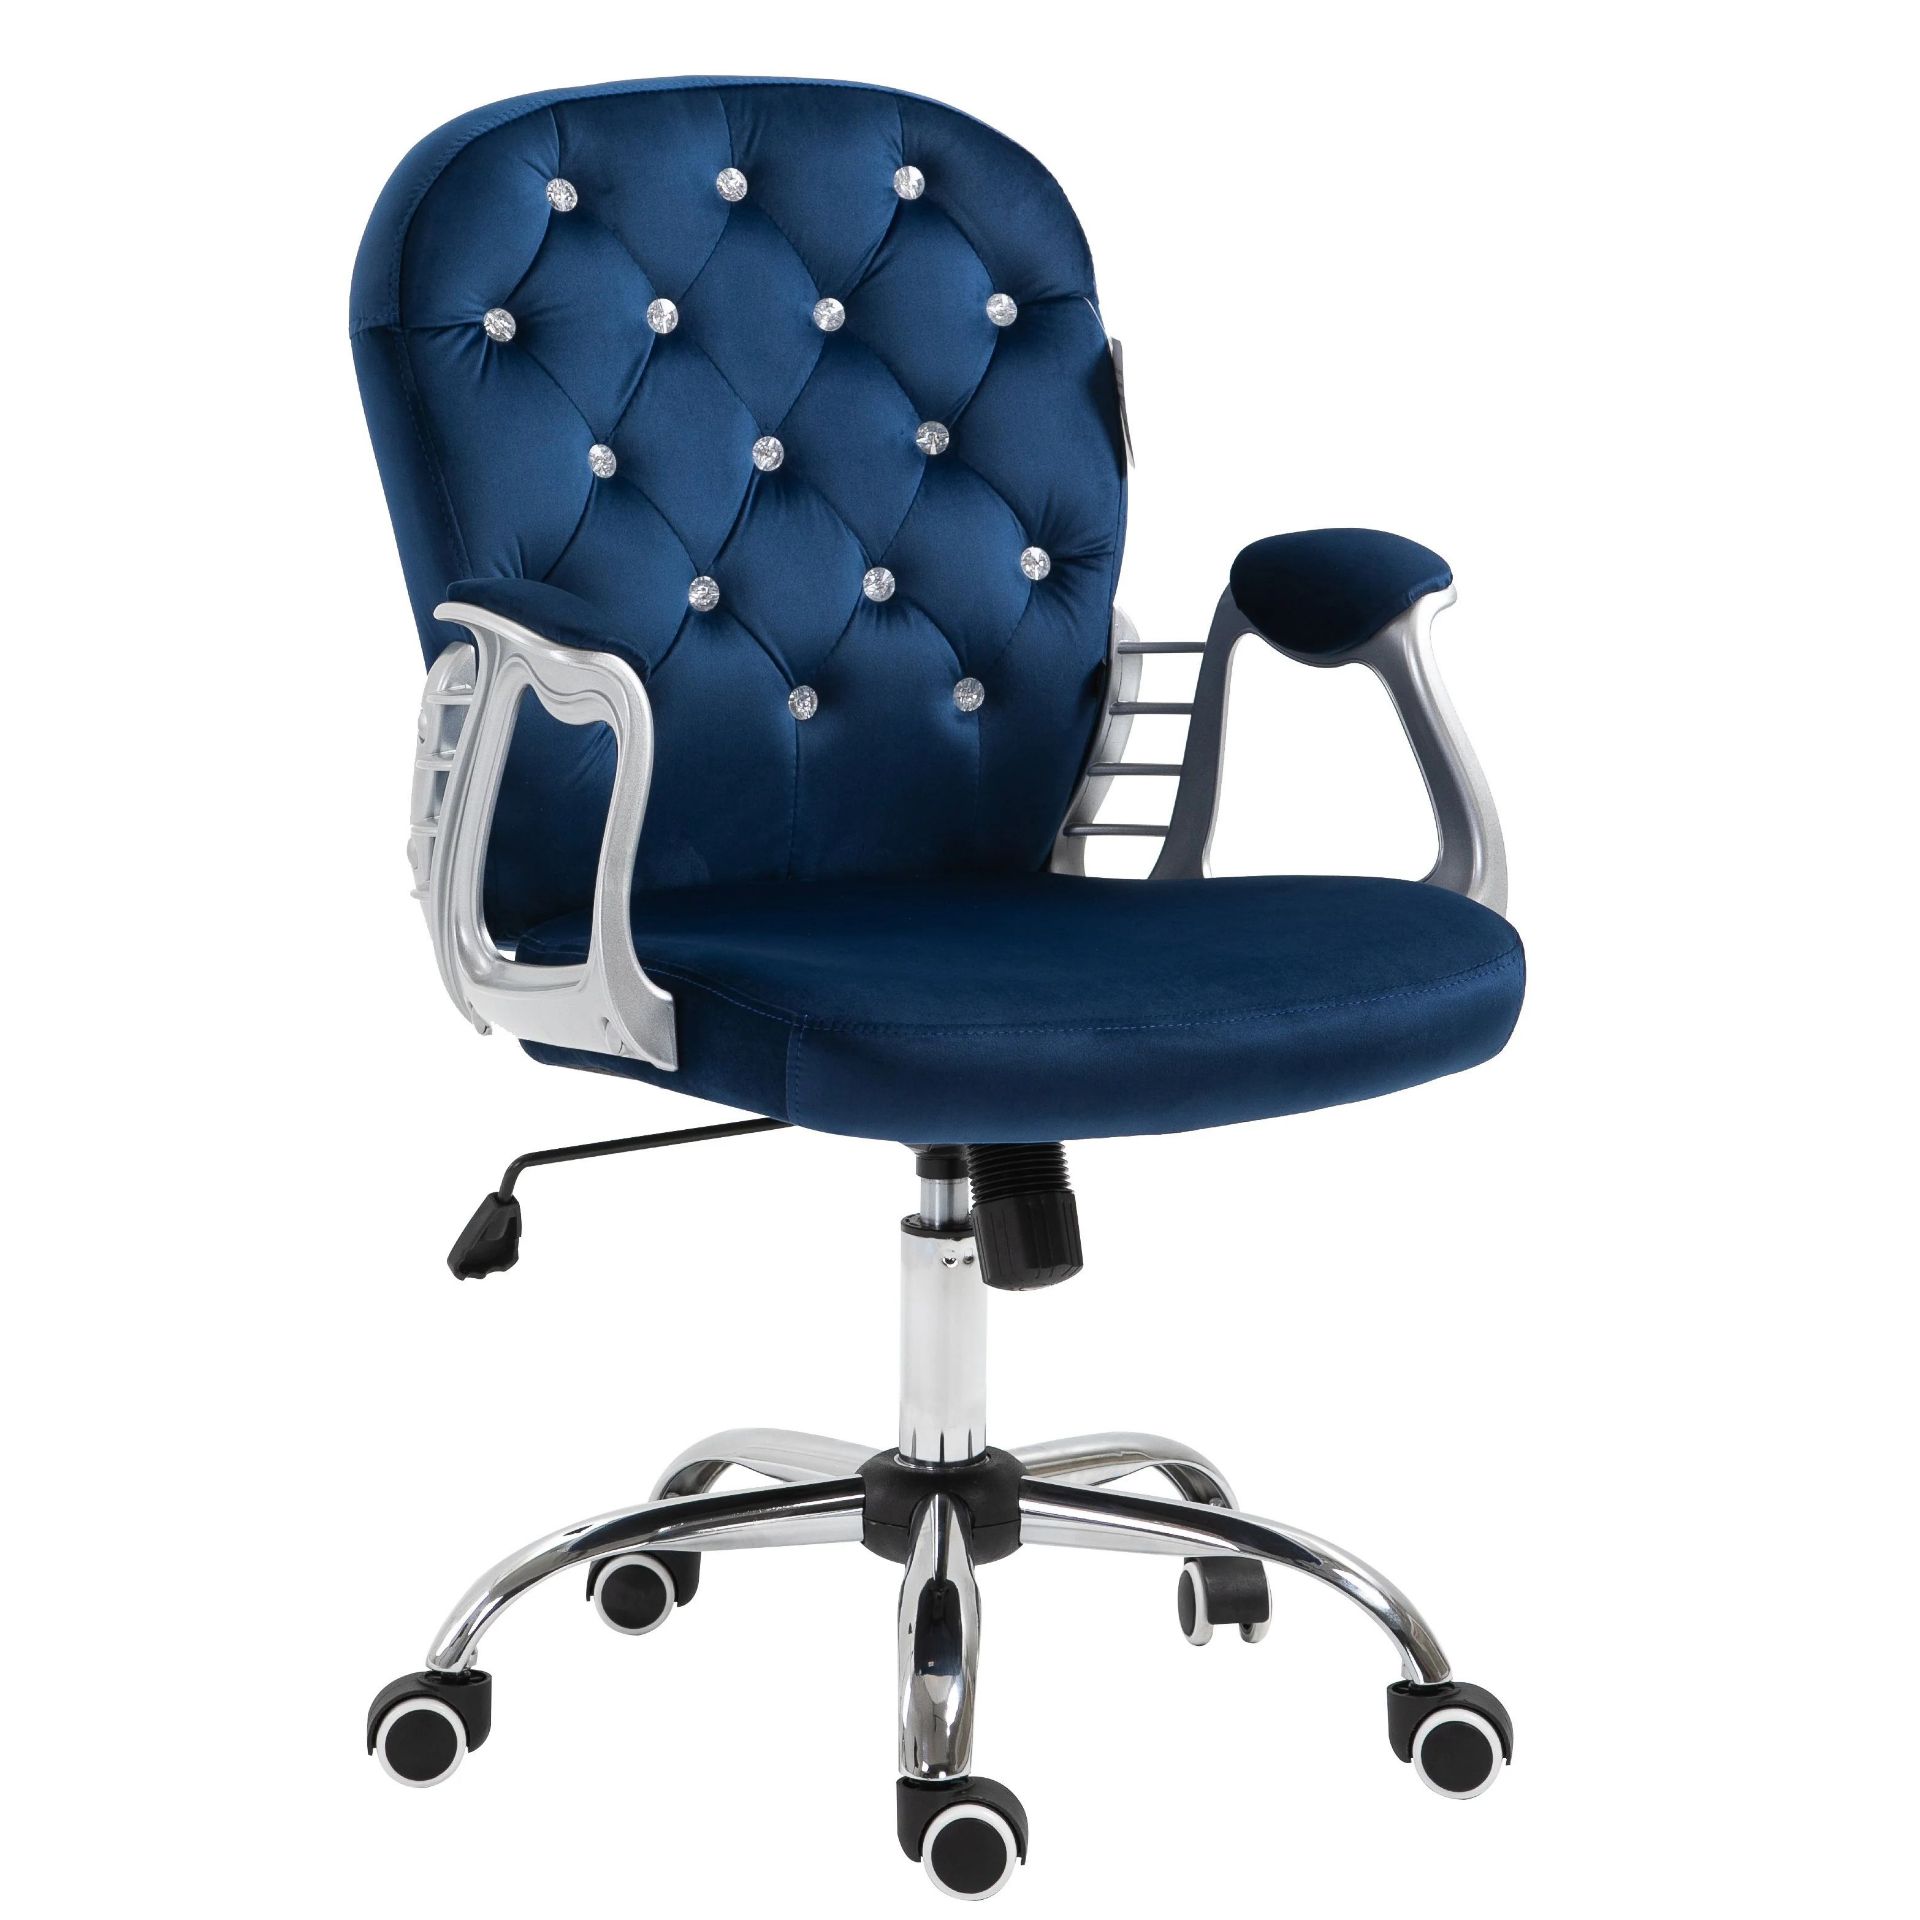 Blue Velvet Chesterfield Swivel Chair. - R14. RRP £155.99. This stylish office chair features a